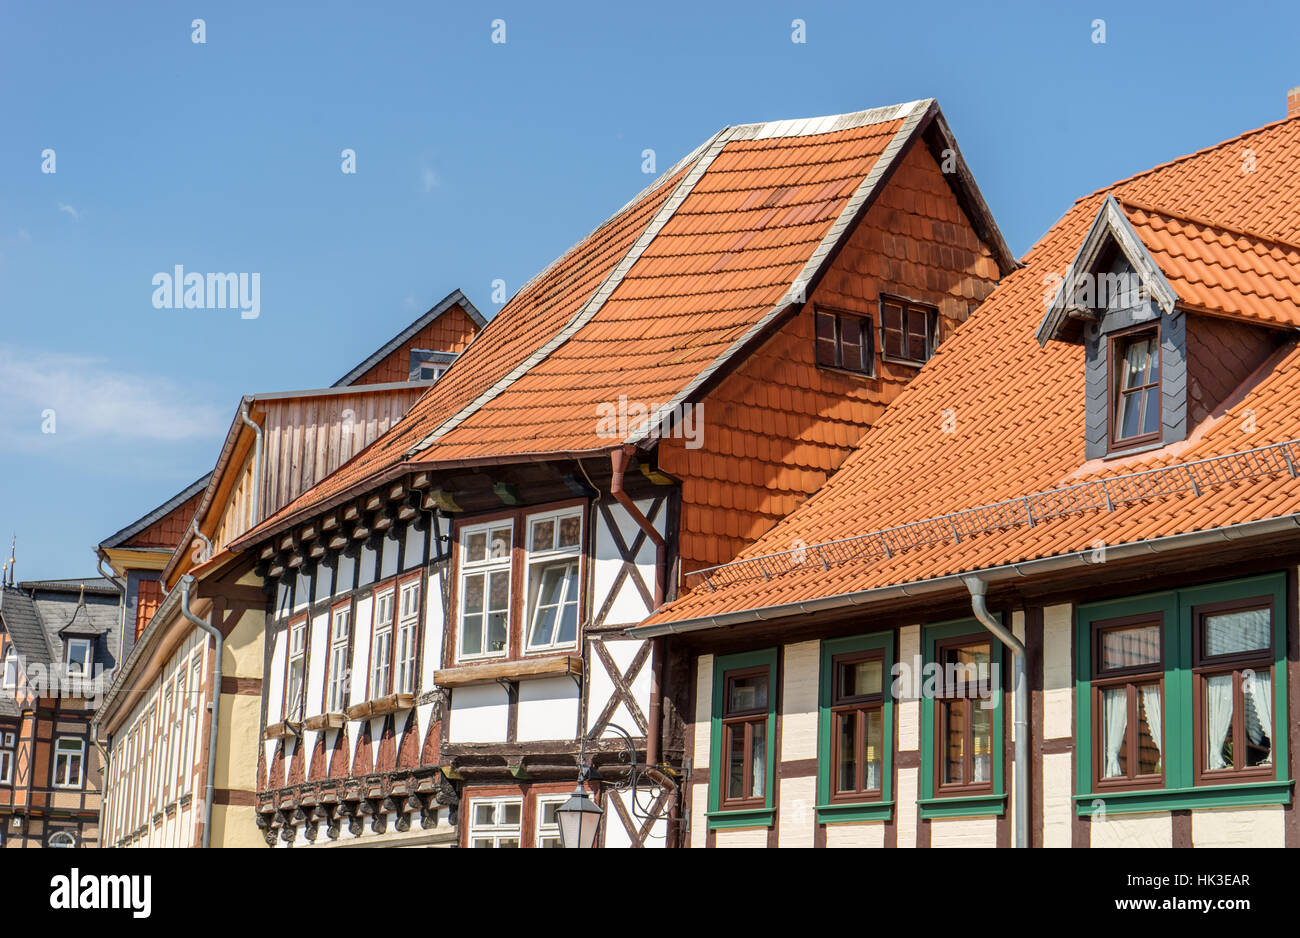 Half-timbered houses in Wernigerode old town Stock Photo